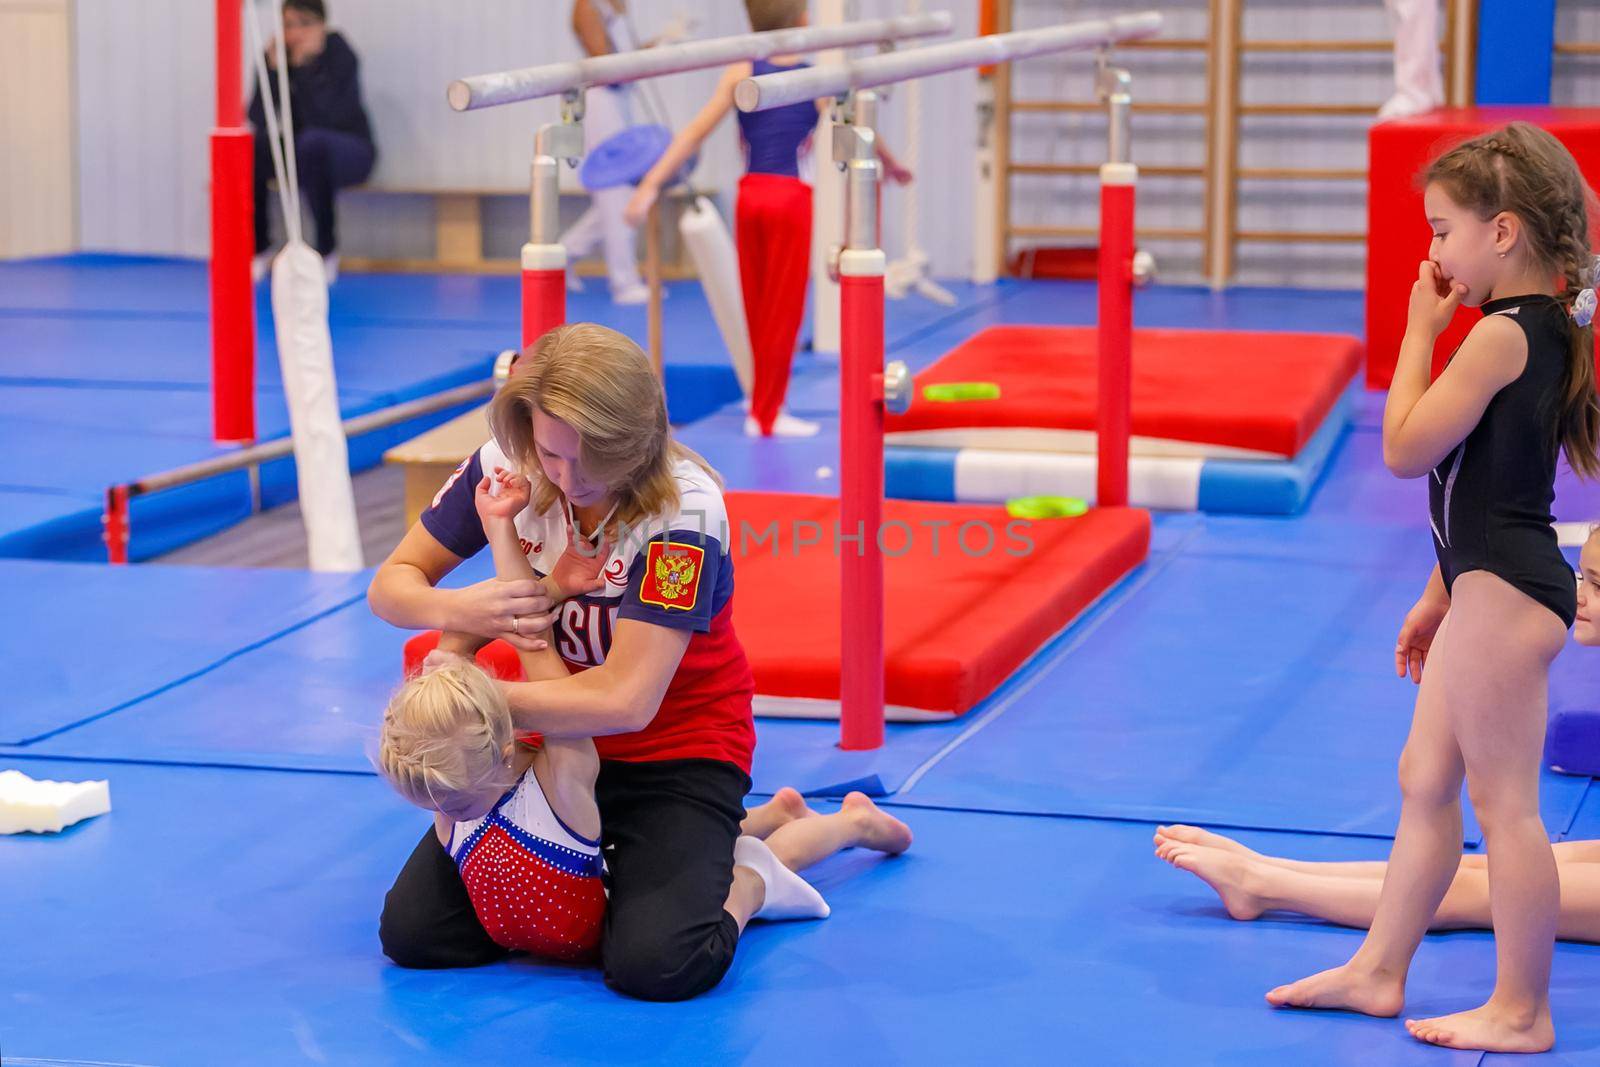 Gymnastics coach stretches a young athlete in the gym. Moscow, Russia September 18, 2019 by Yurich32